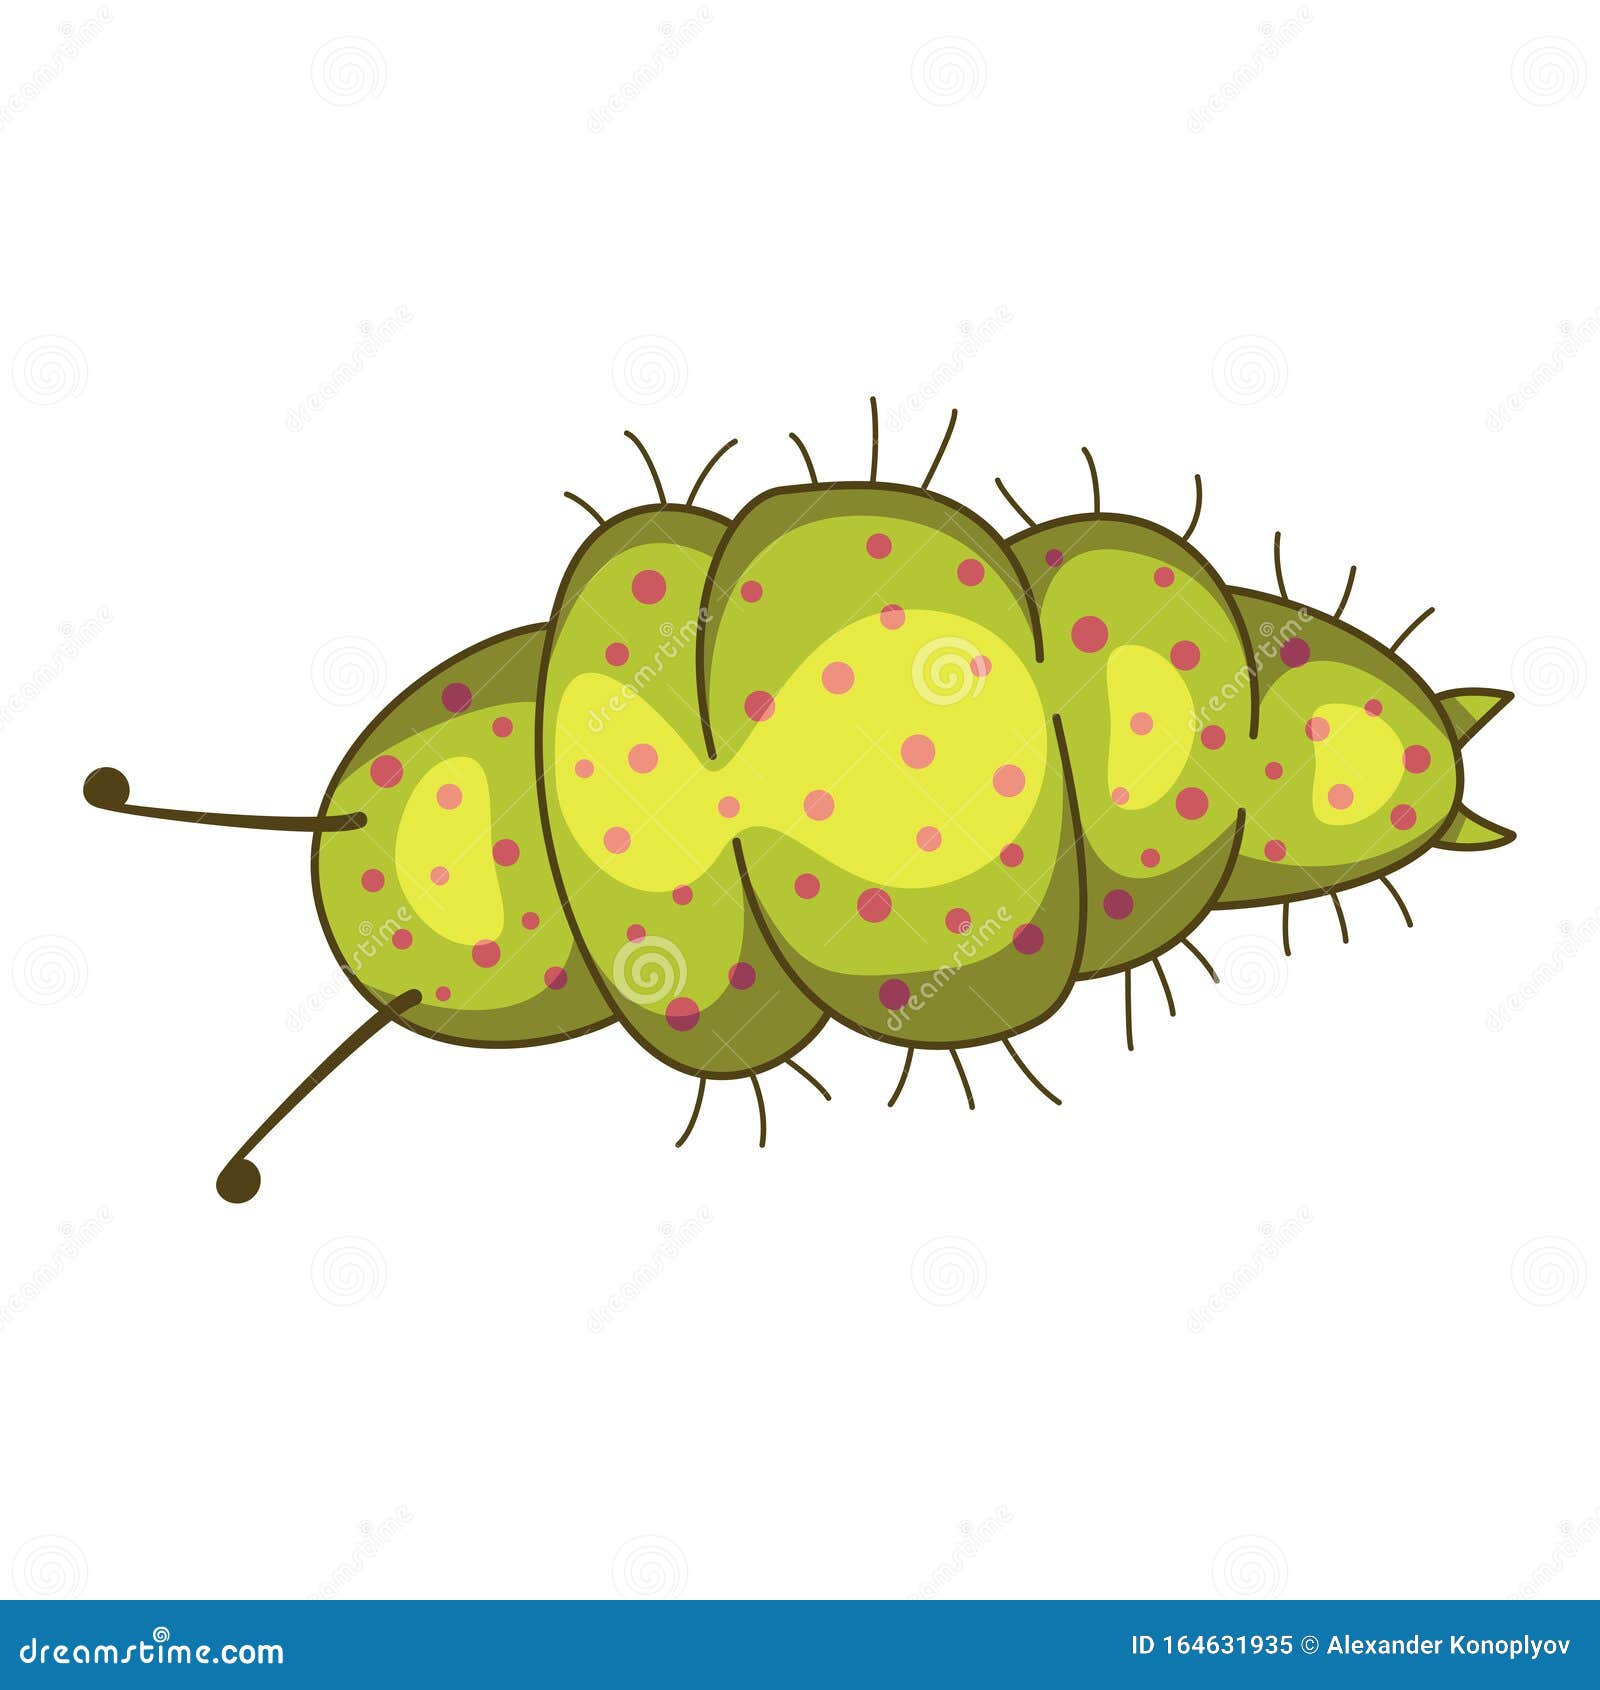 caterpillar insect icon, green nature and entomology